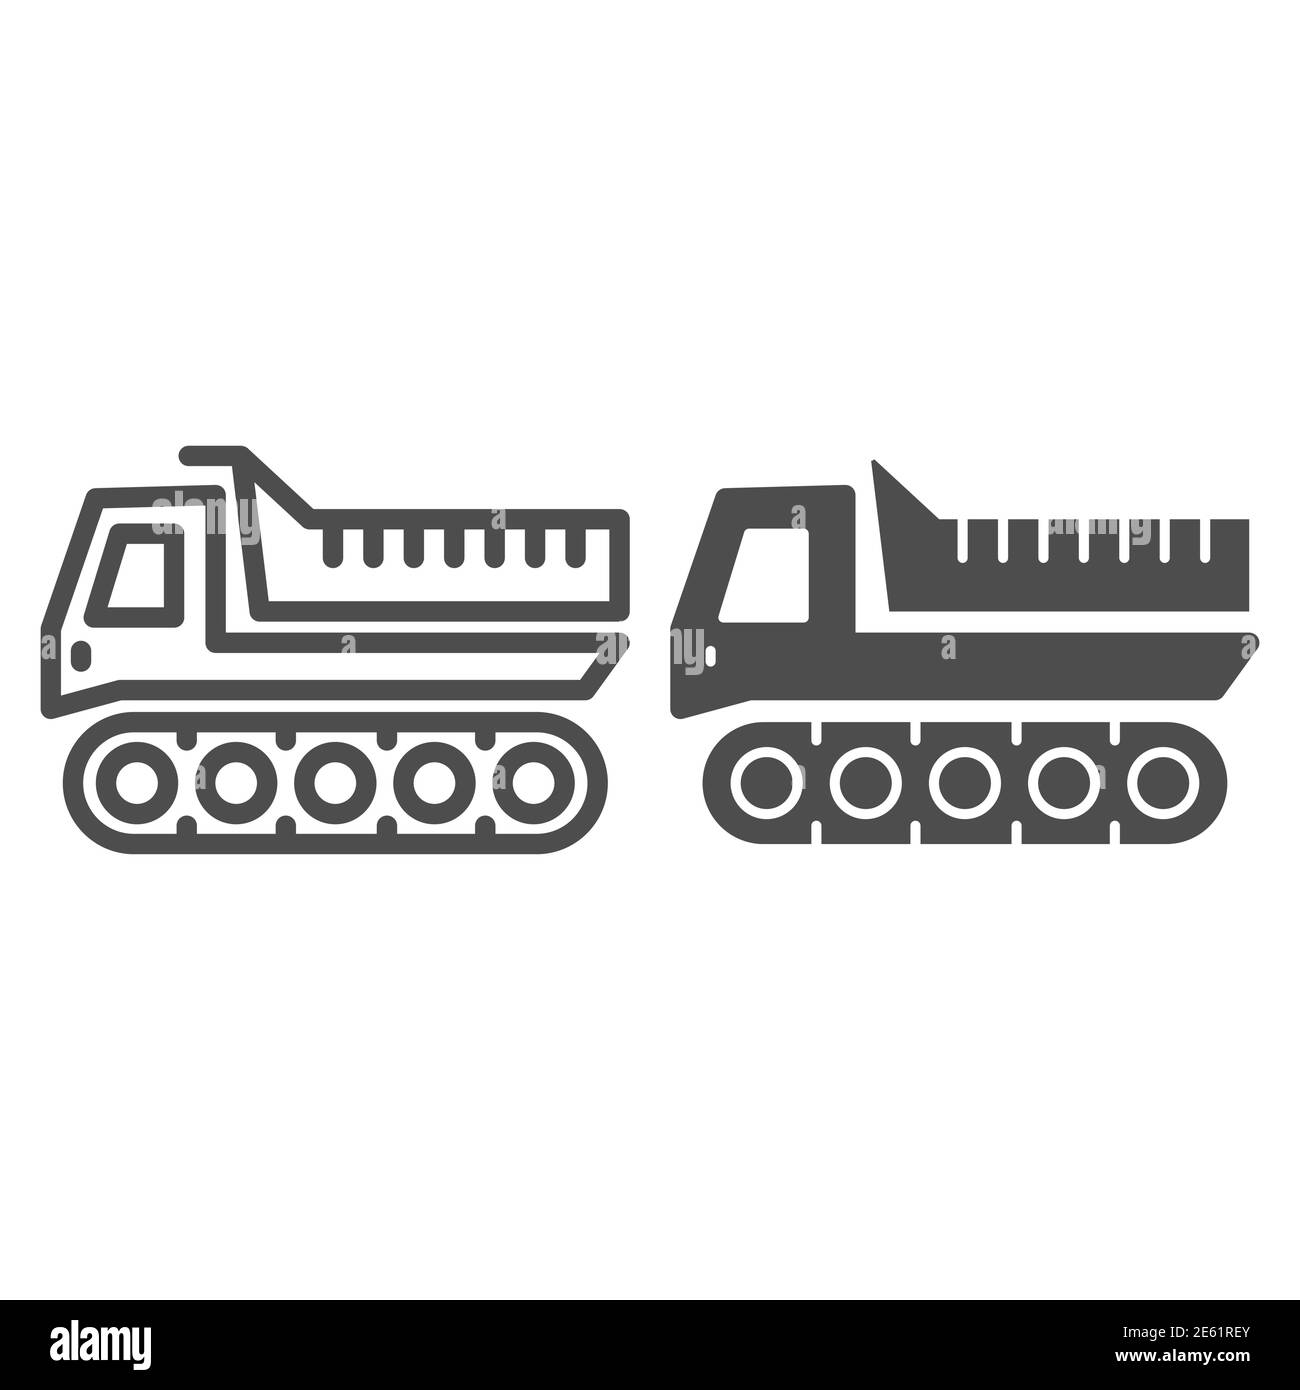 Snowplow line and solid icon, winter transport symbol, cross-country vehicle vector sign on white background, caterpillar snowmobile icon outline Stock Vector